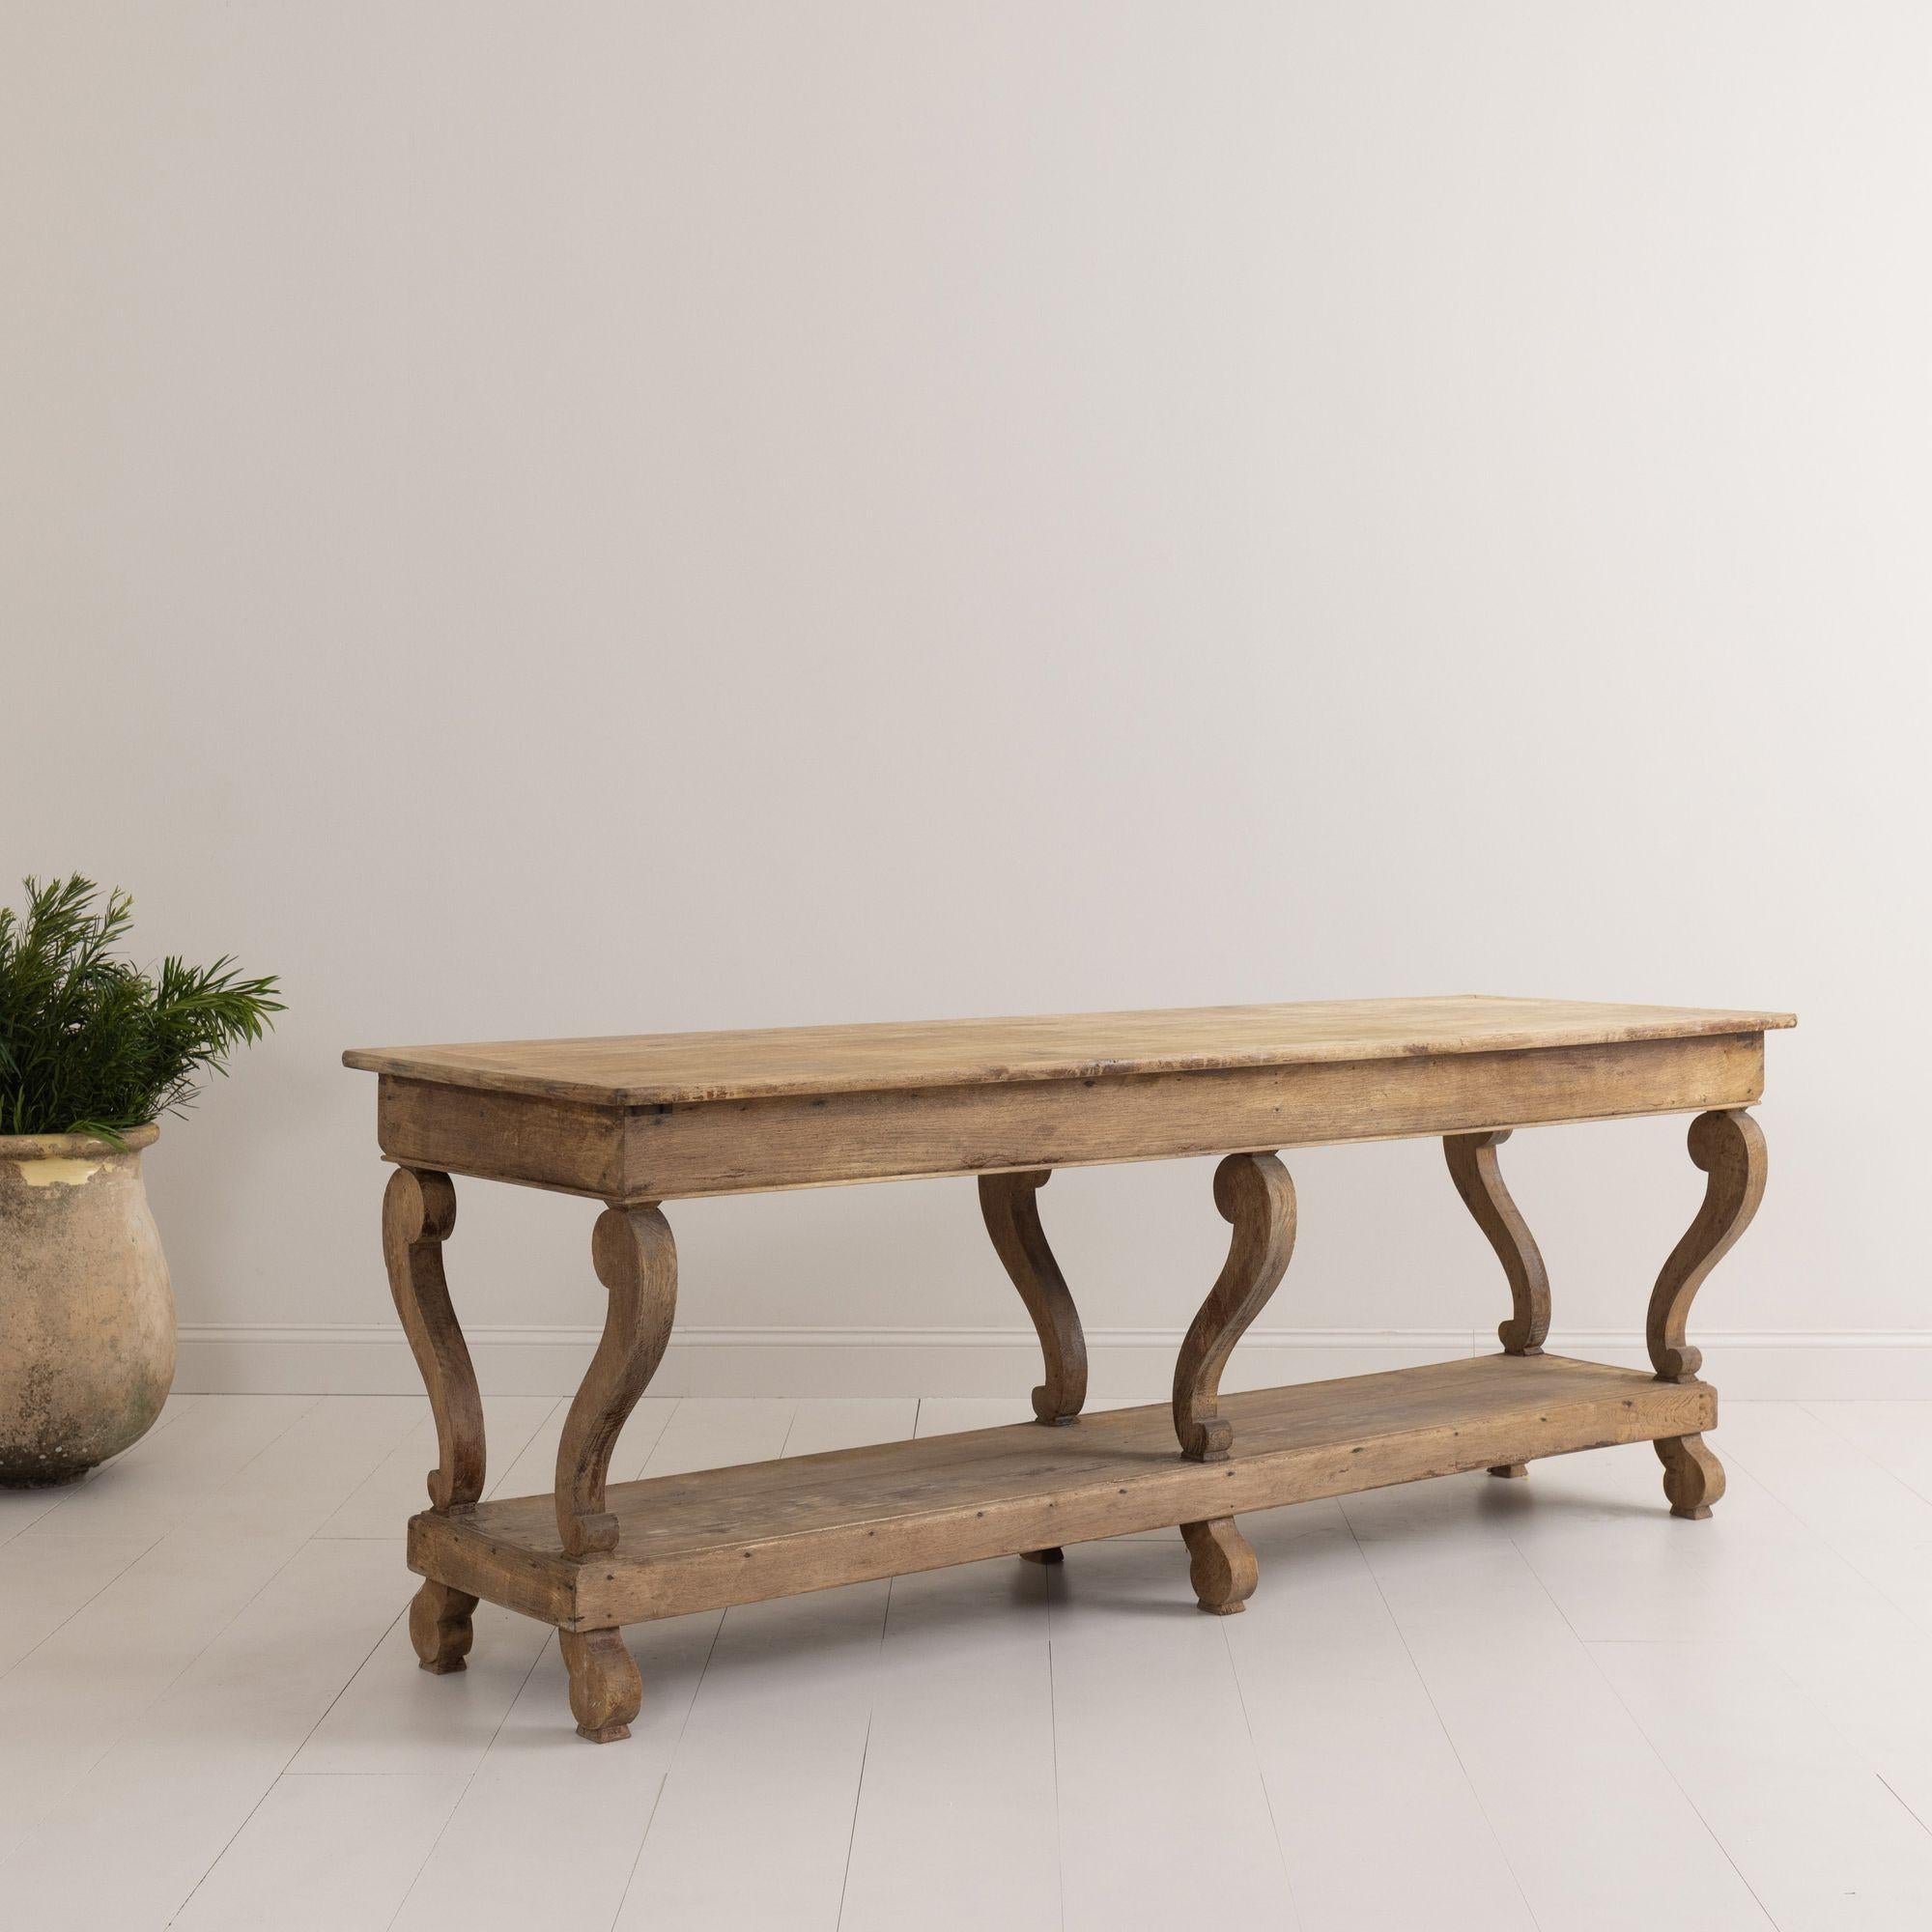 An exceptional French Charles X oak draper's table from the Restoration period in its original natural patina with decorative volute details.  This piece would make a lovely kitchen island or console table or bathroom vanity.  Found in the village